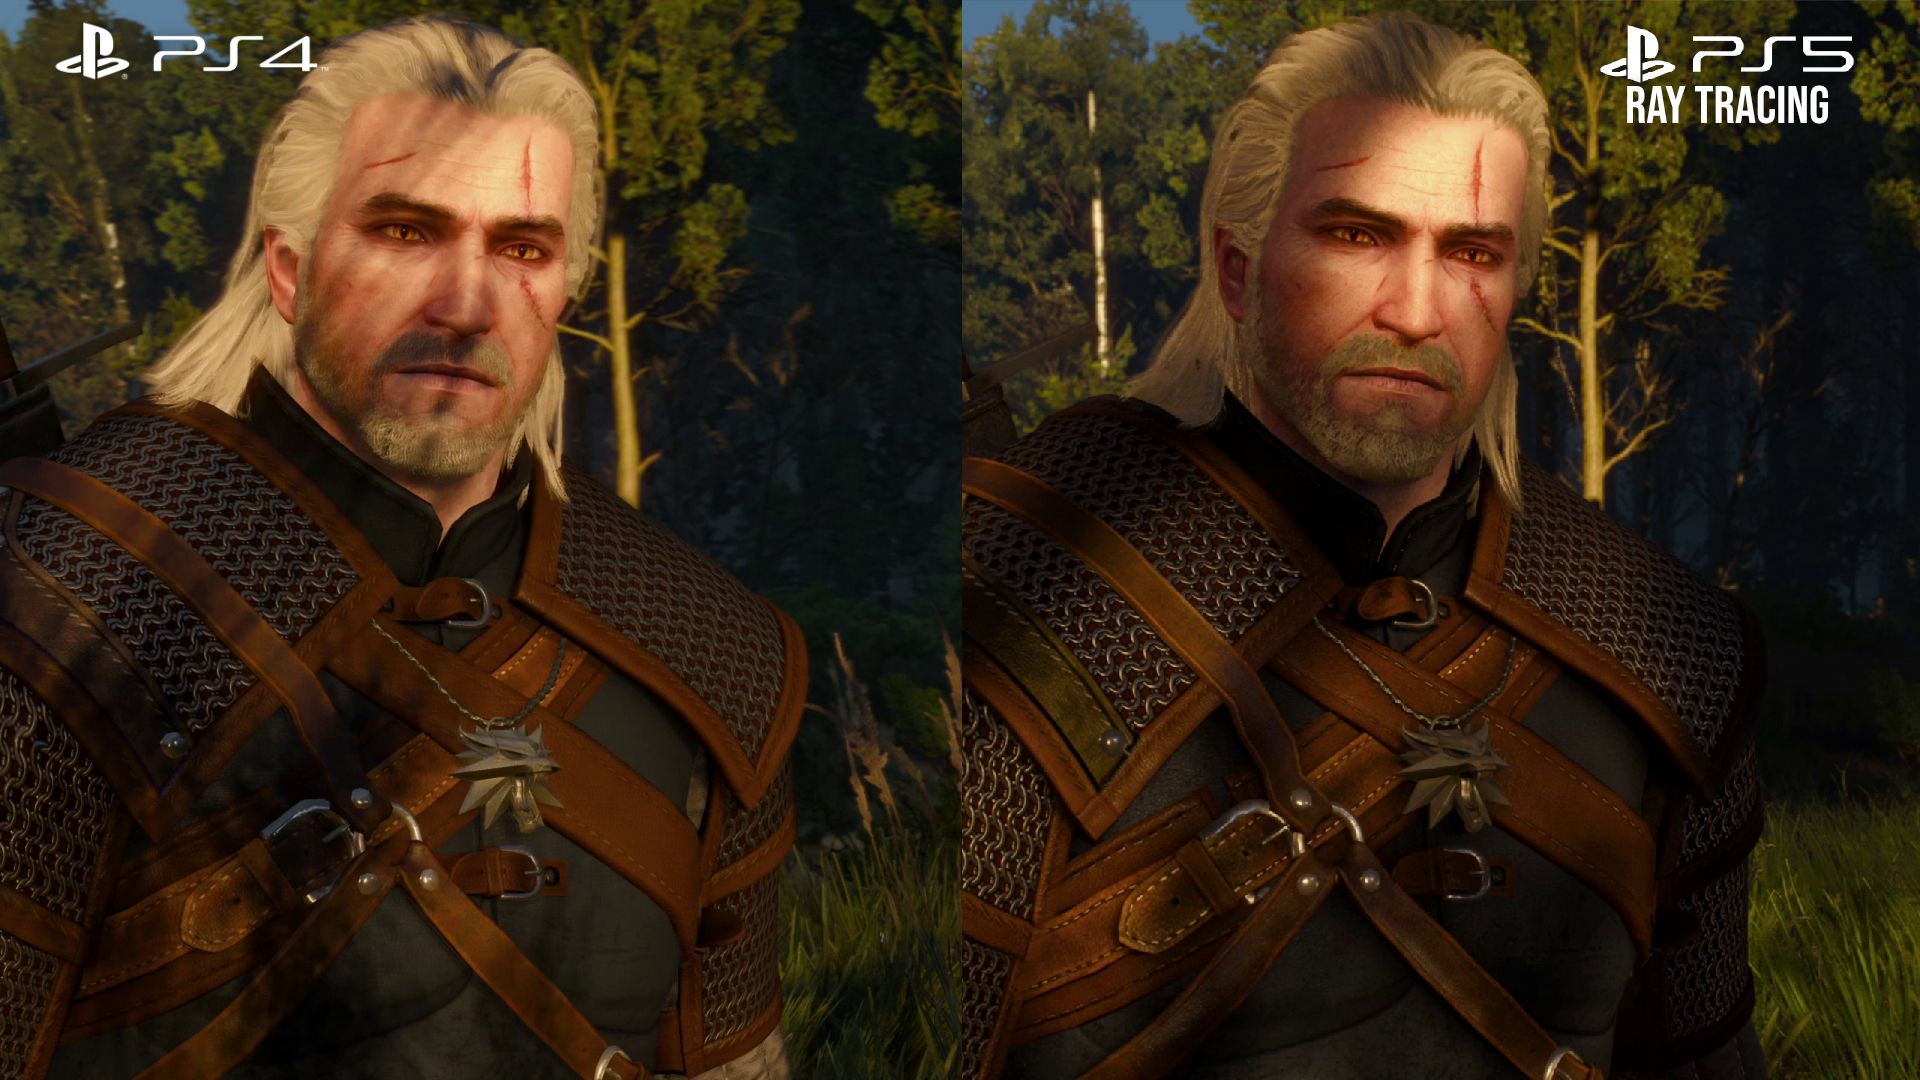 The Witcher 3 - PS4 vs. PS5 Next Gen Gameplay, The Witcher 3: Wild Hunt,  gameplay, coin, PlayStation 5